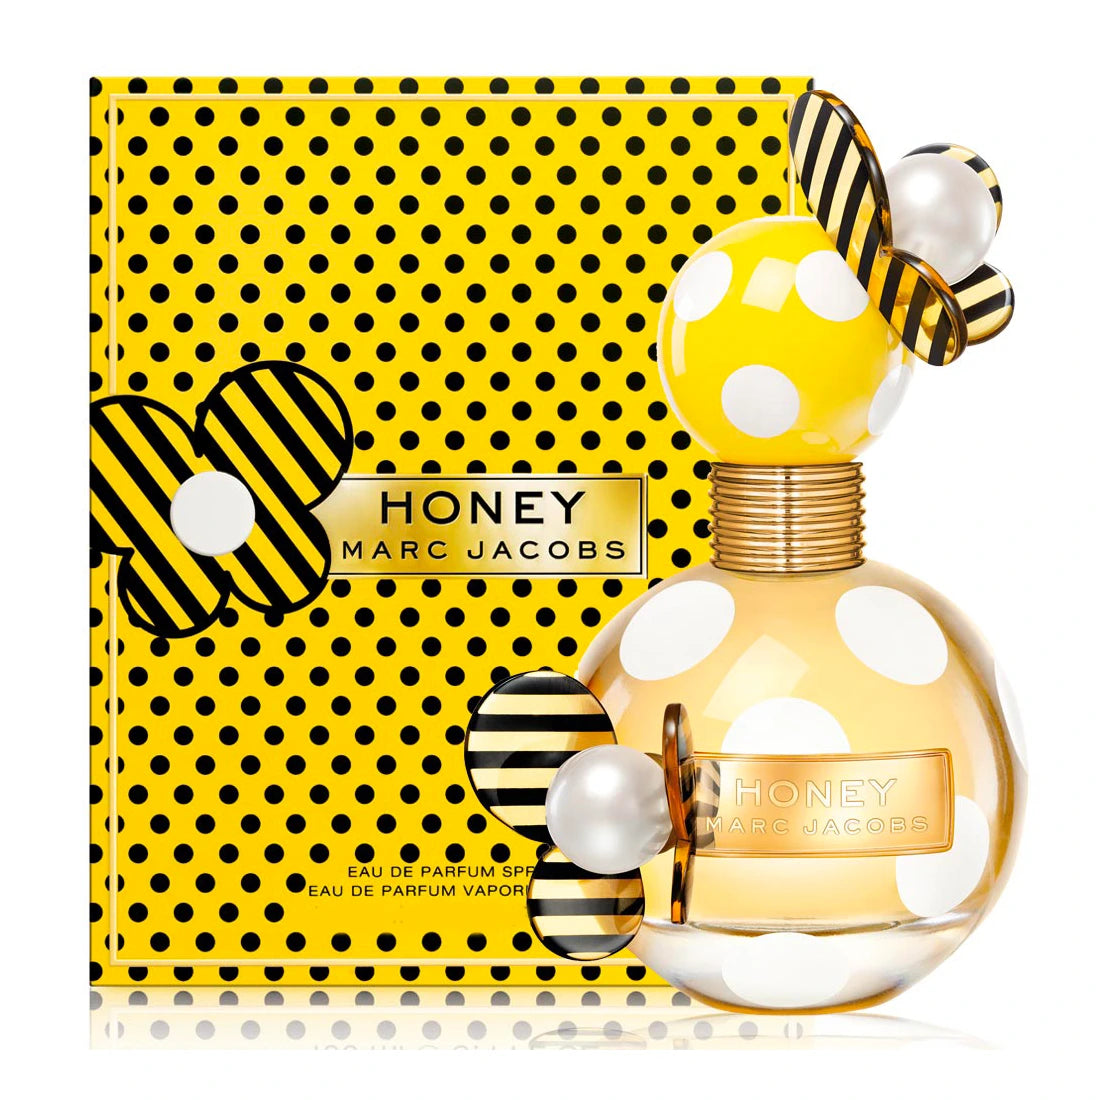 <p data-mce-fragment="1">Sweet, sassy, sunny. Honey by MARC JACOBS is a delicious floral fragrance full of energetic, alluring notes with a sparkling golden touch. It’s the perfect mix of brightness and warmth.</p>
<p data-mce-fragment="1">Top Notes: pear, juicy mandarin.<br>Middle Notes: orange blossom, peach nectar, apricot, honeysuckle.<br>Base Notes: honey, golden vanilla, smooth woods.</p>